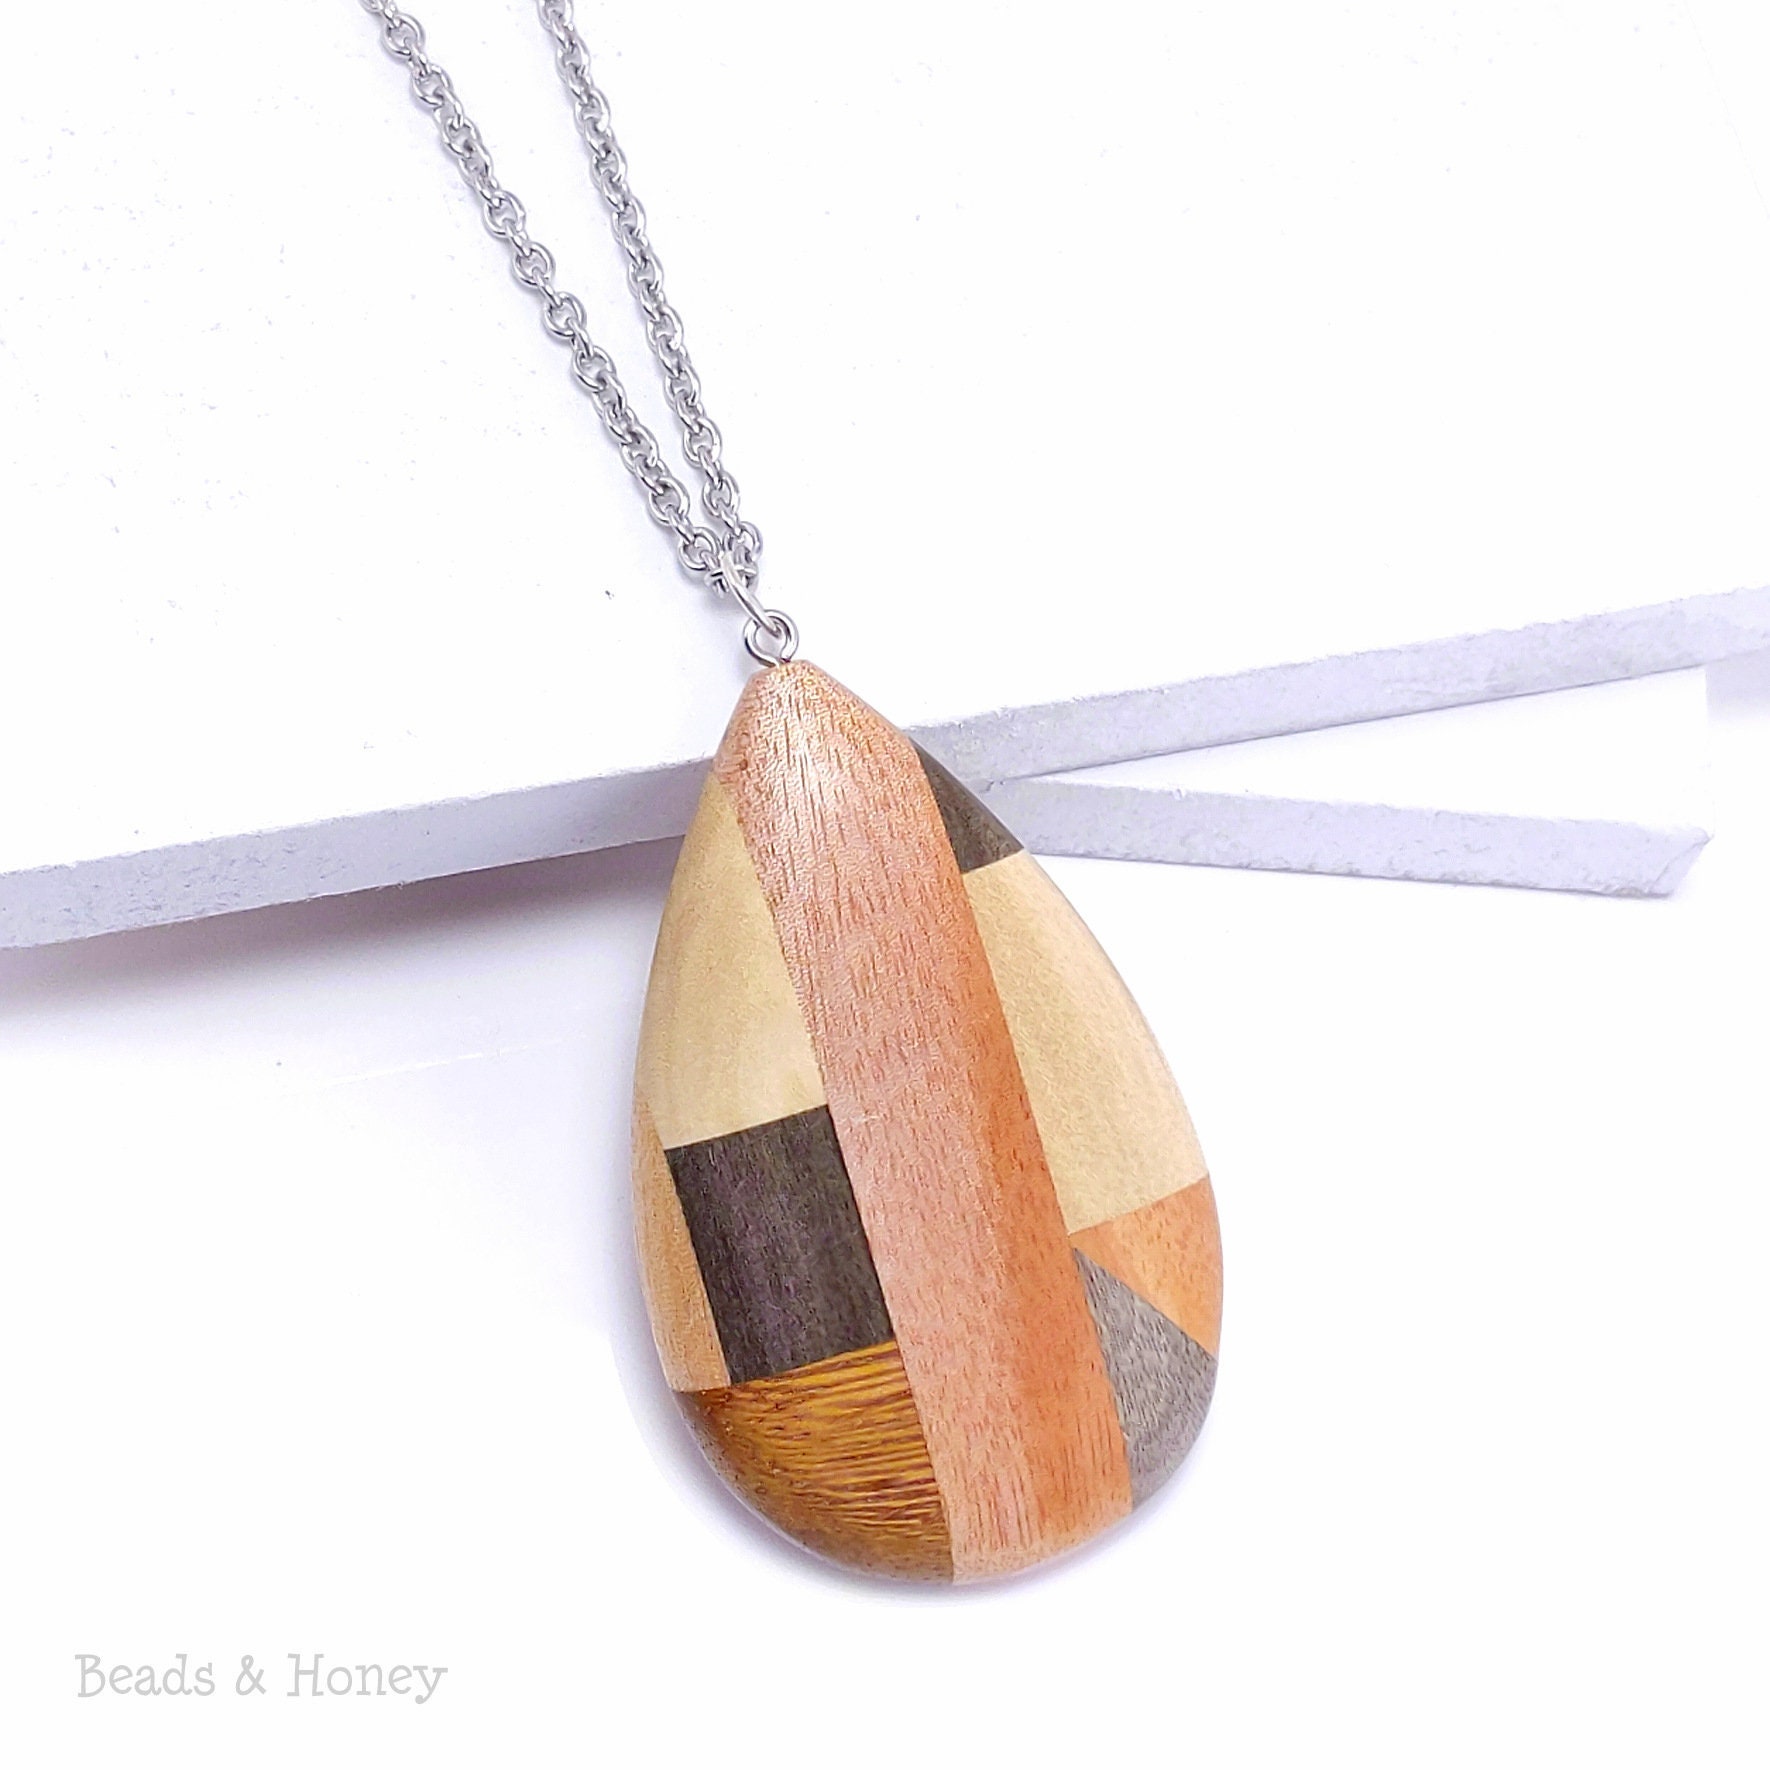 Large Multicolored Natural Wood - ID 2596-PNDT Artisan Made 1pc Mosaic Mixed Wood Shield Pendant with Stainless Steel Bail 64x47x7mm